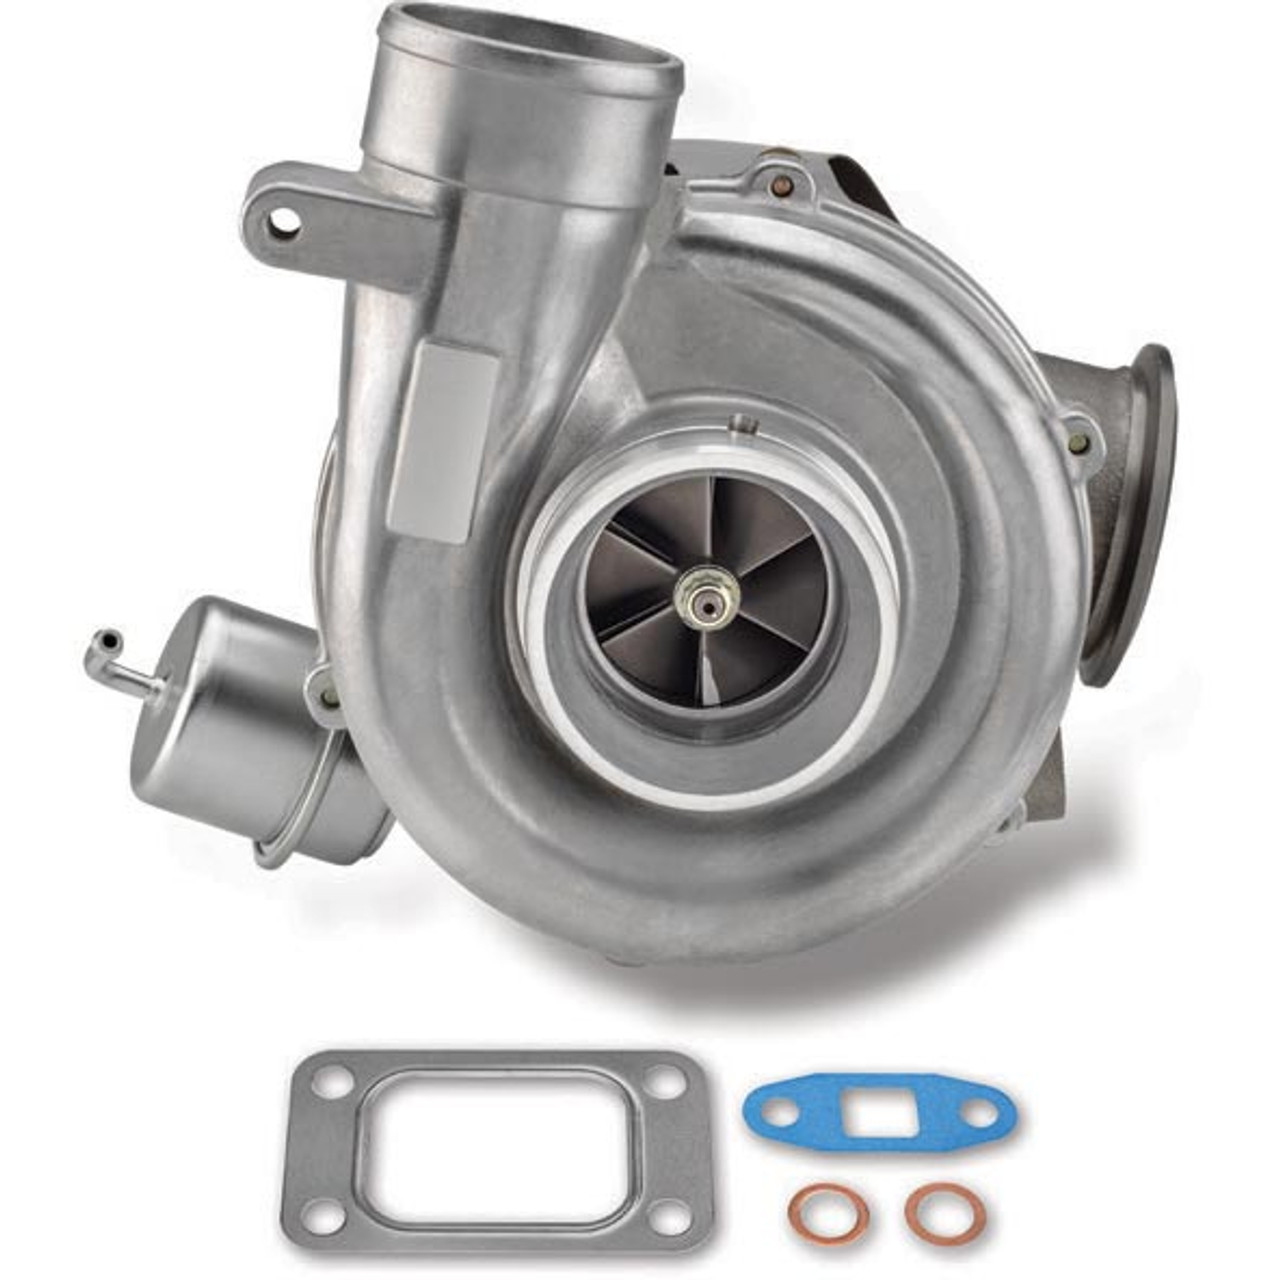  PUREPOWER NEW DIRECT REPLACEMENT TURBOCHARGER 1996-2002 GM 6.5L DIESEL (GM4,GM5,GM8) (PPT8651-PP)